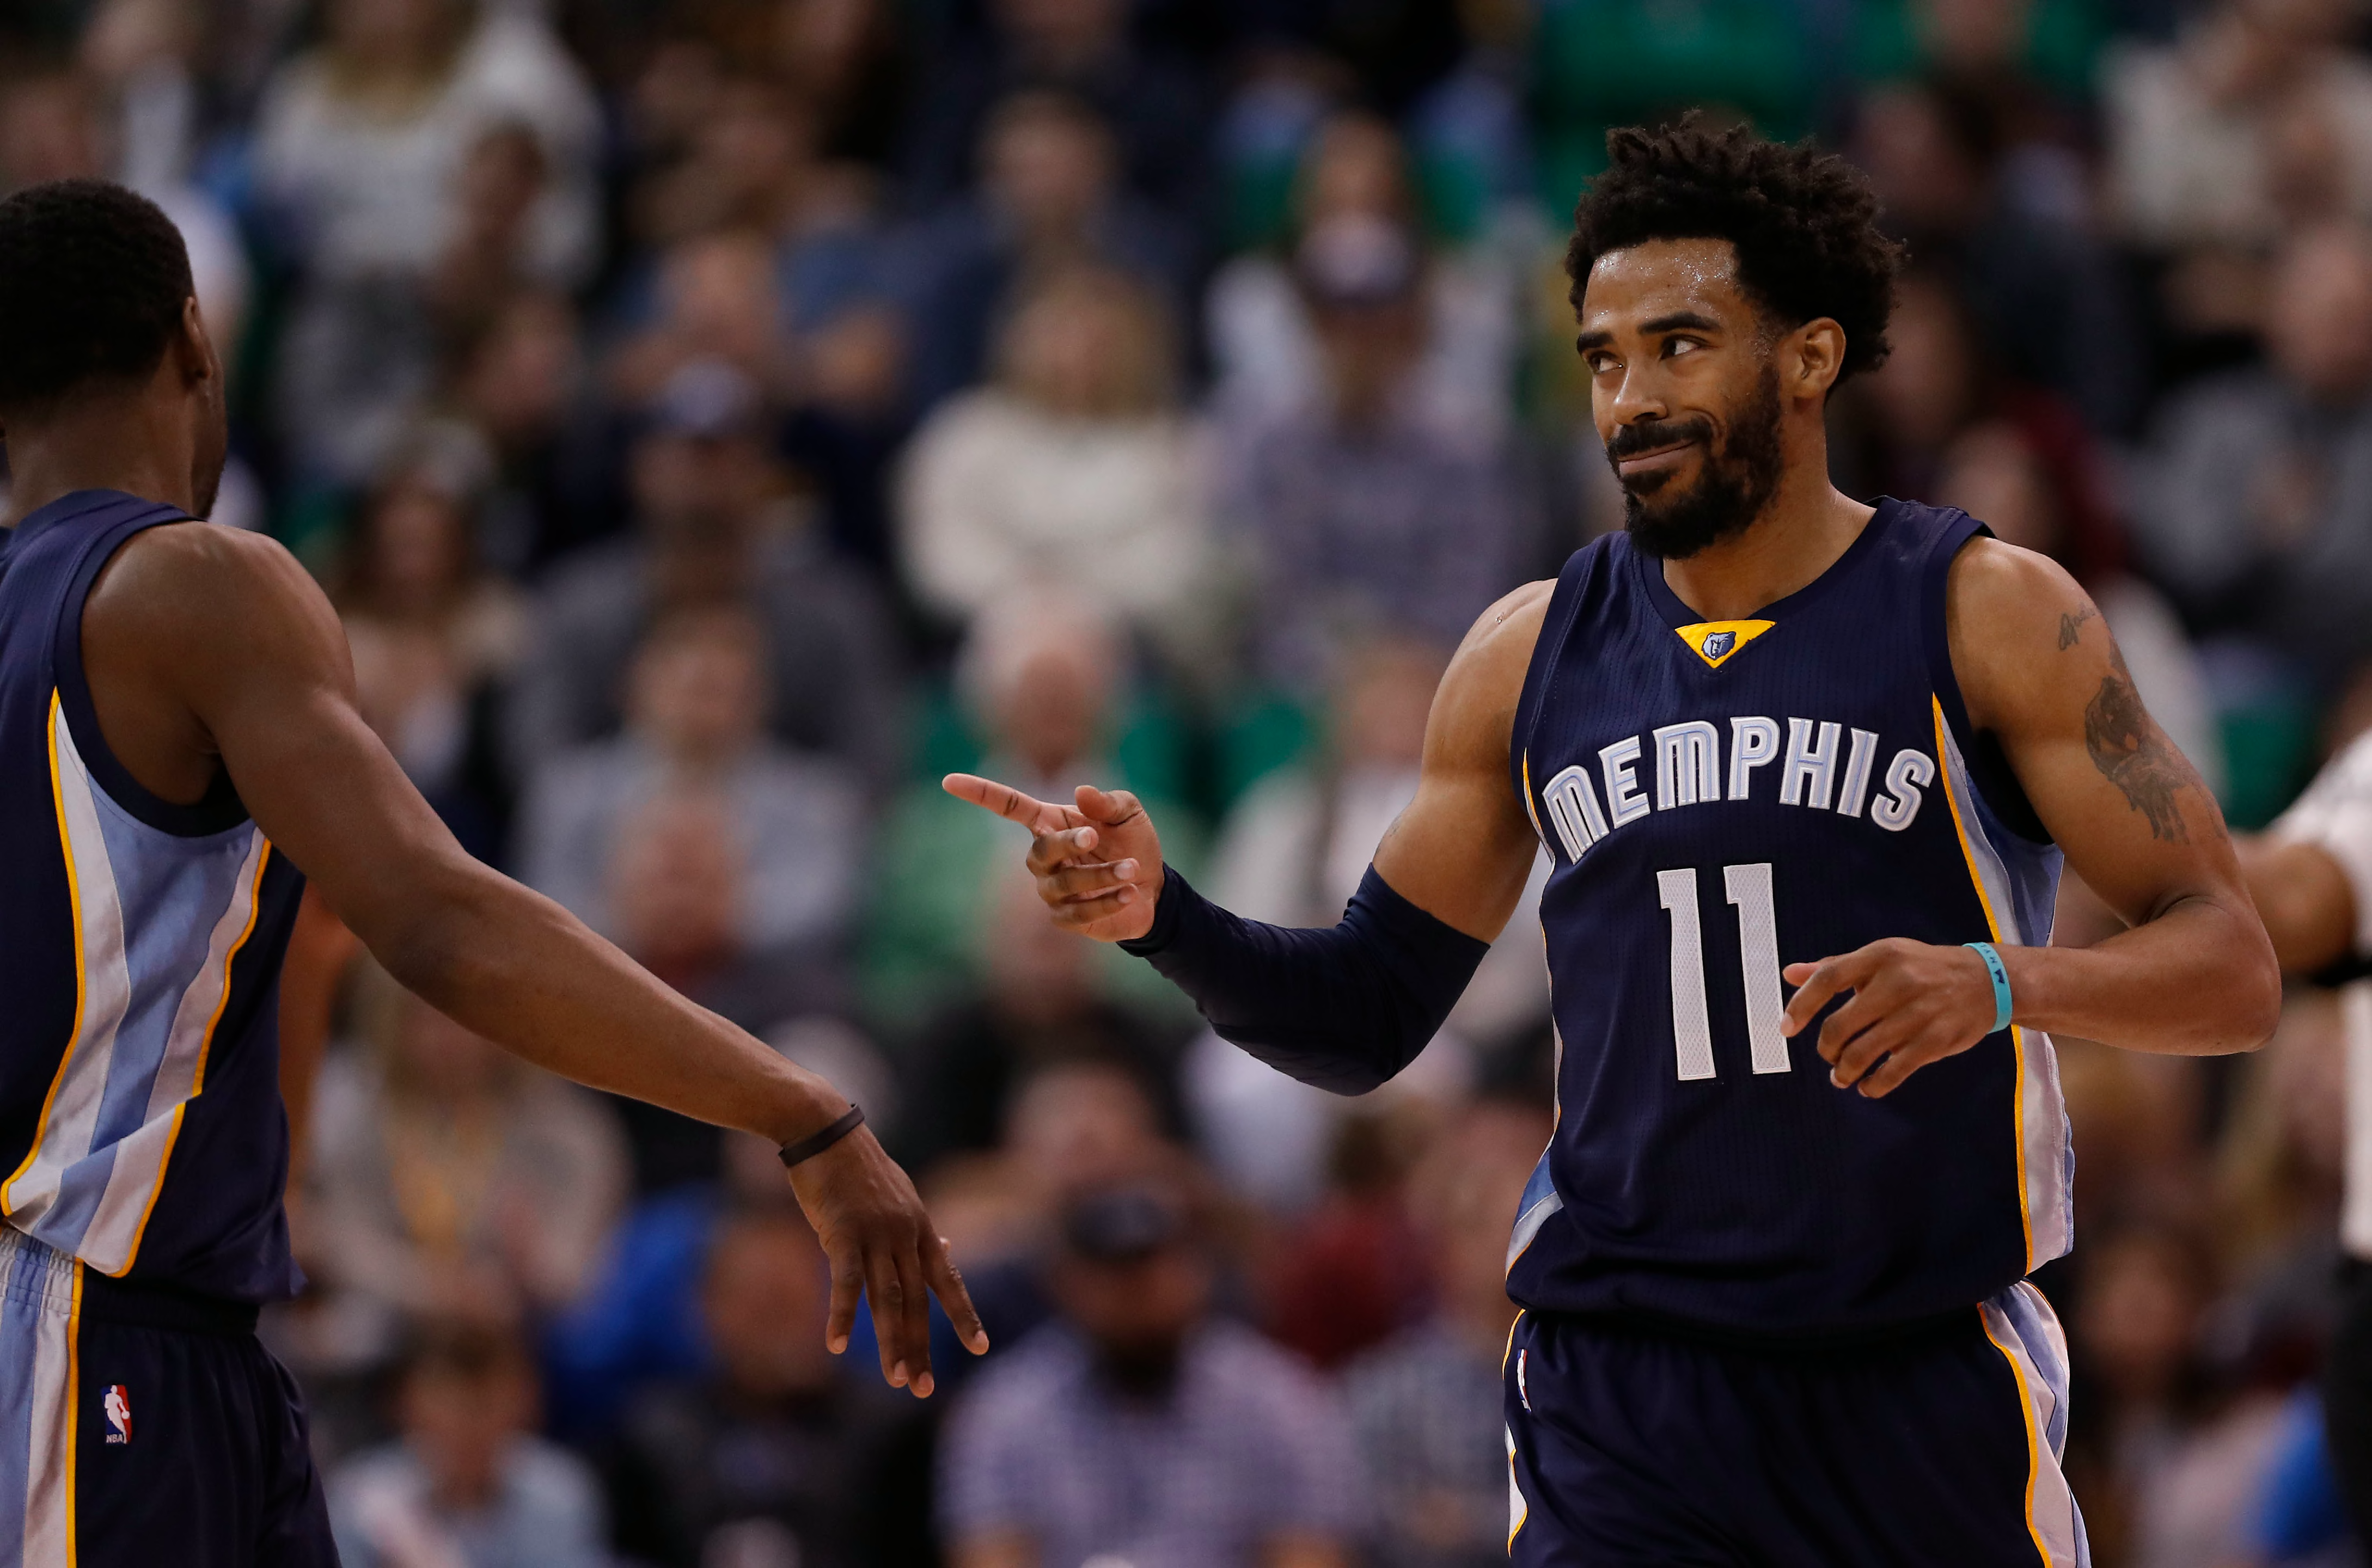 Mike Conley Jr. had an All-Star NBA career, but it was his